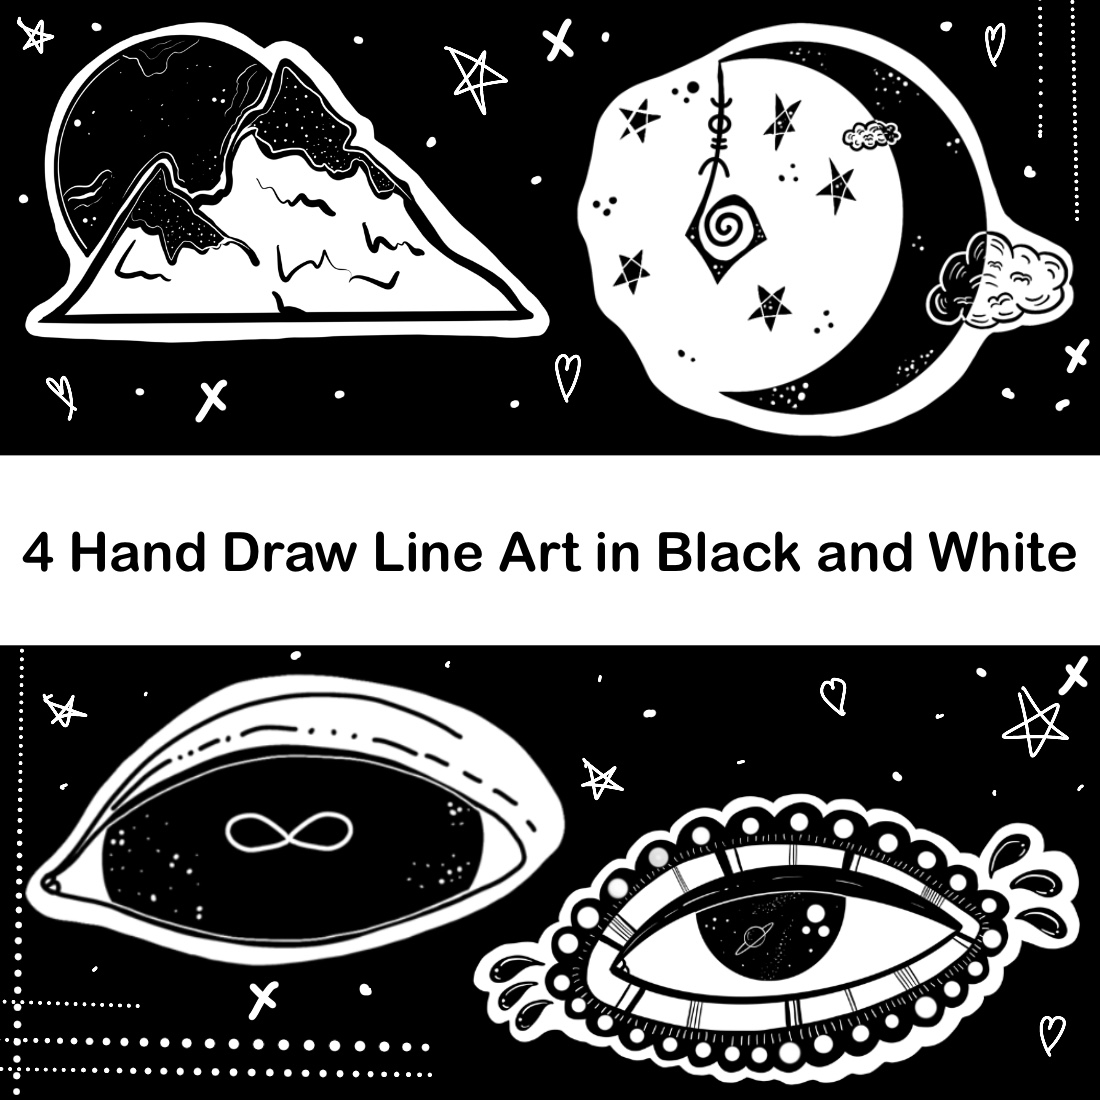 Hand Drawn Line Art Graphics in Black and White cover image.